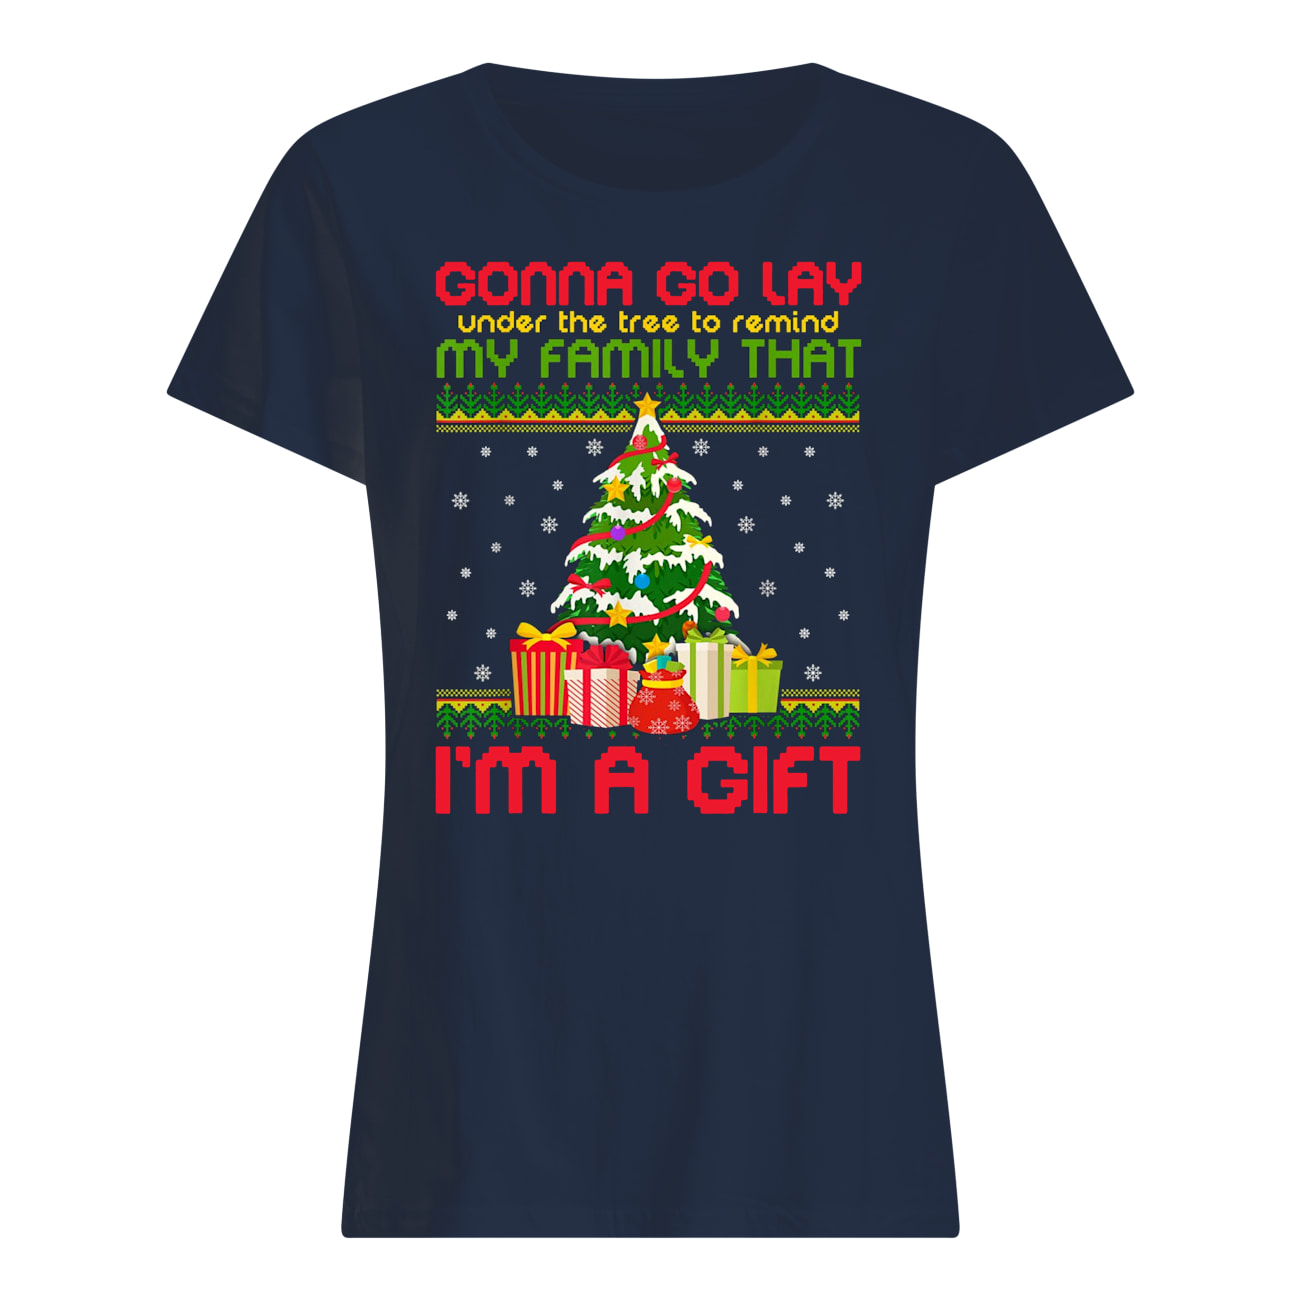 Gonna go lay under the tree to remind my family that i'm a gift ugly christmas womens shirt